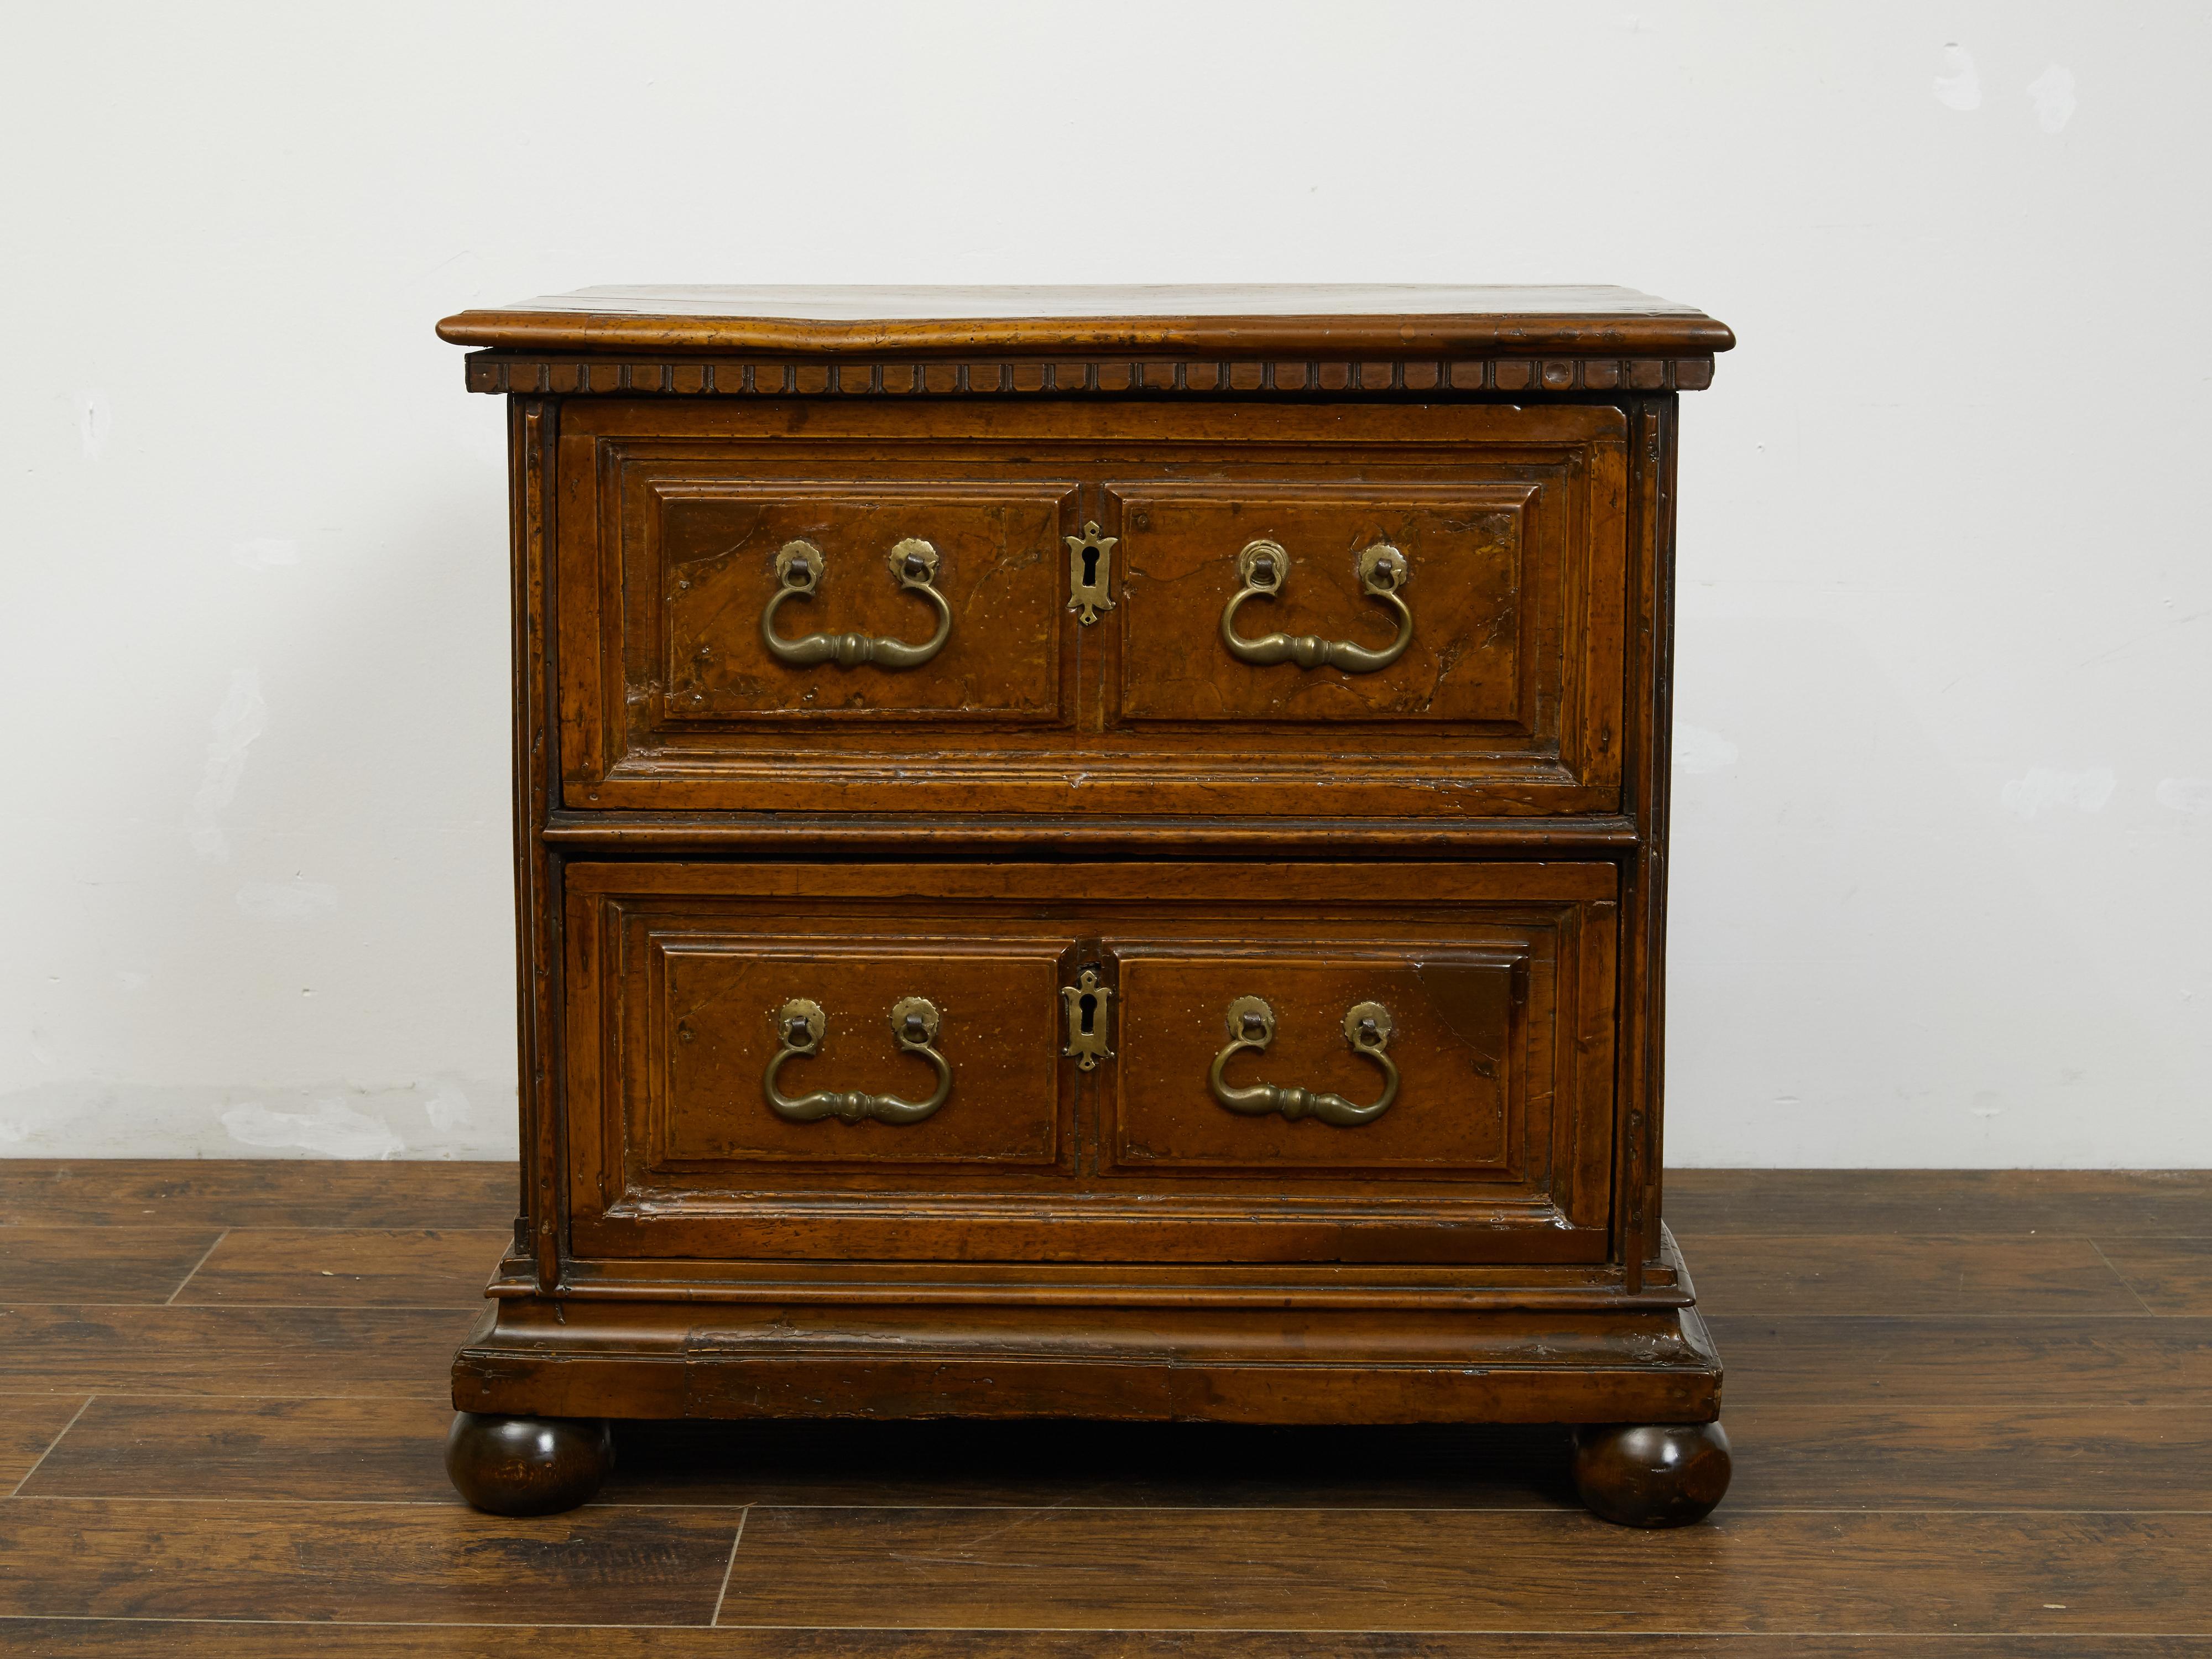 An English walnut commode from the early 19th century, with dentil molding and two drawers. Created in England during the early years of the 19th century, this petite walnut commode features a rectangular top sitting above a dentil molding. The rest